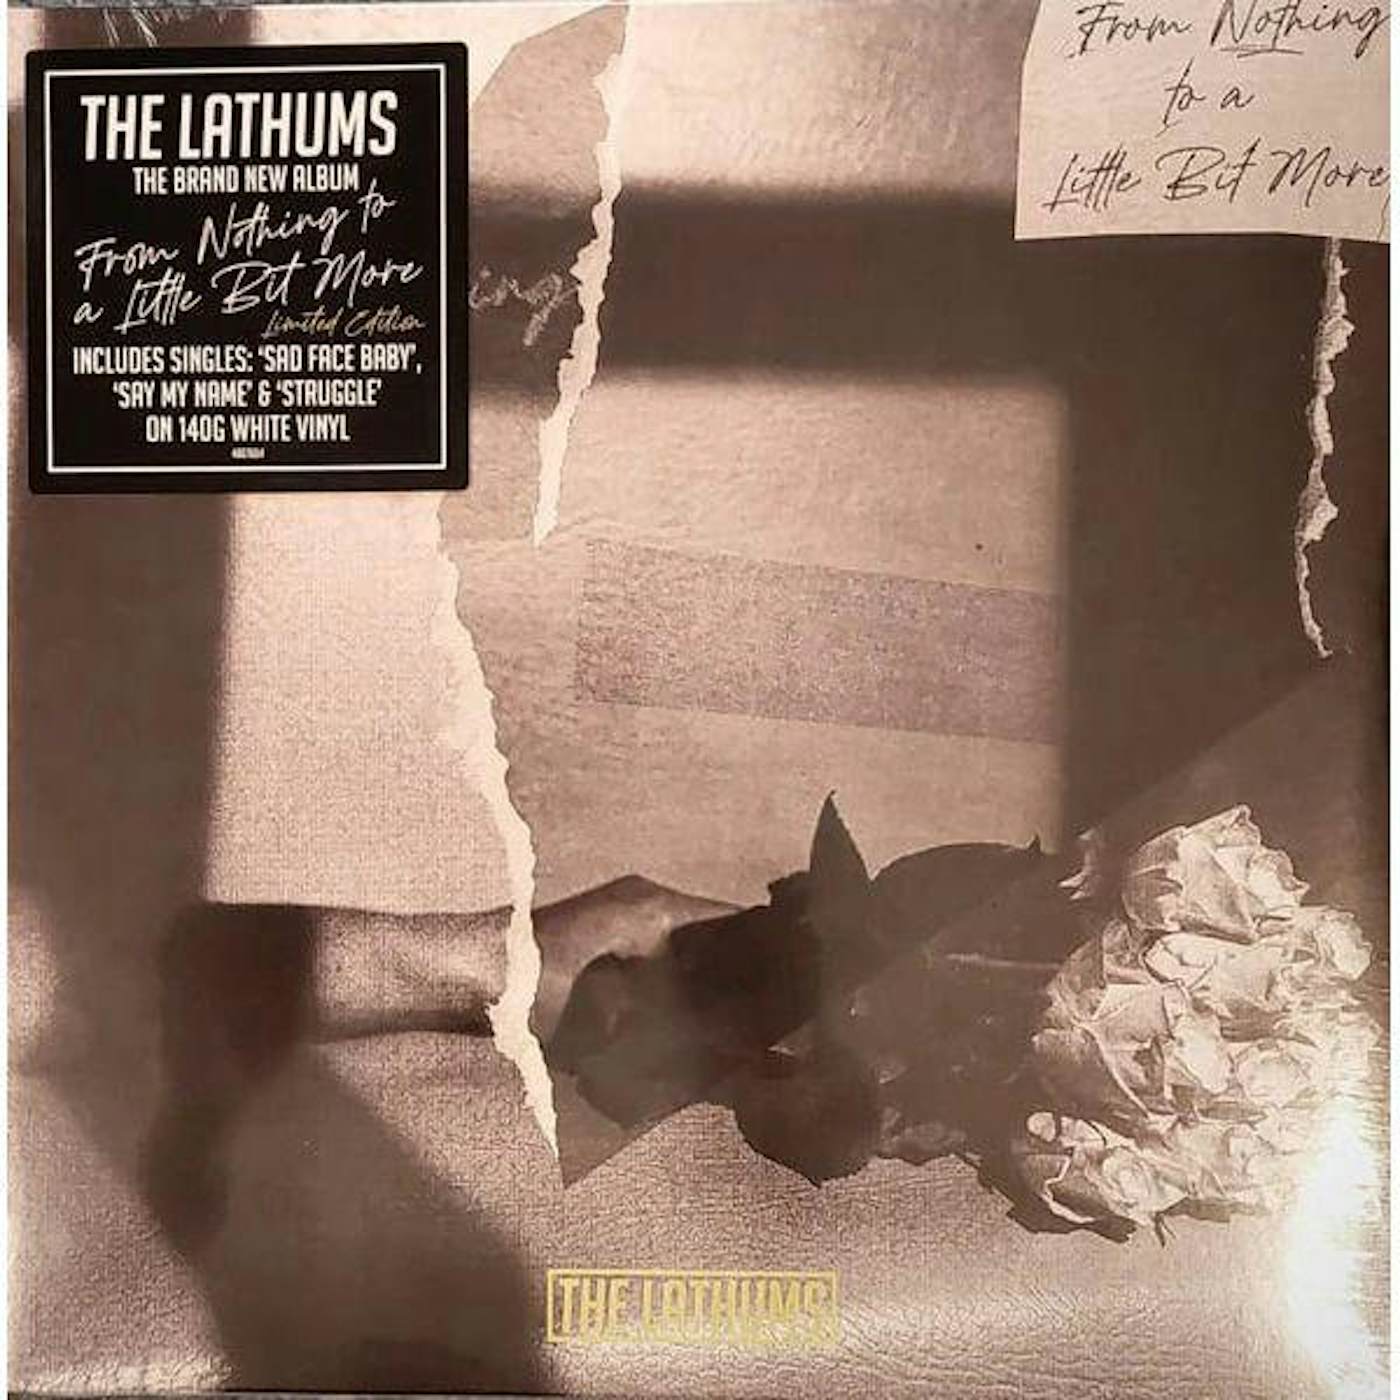 The Lathums  From Nothing To A Little Bit More (White) Vinyl Record